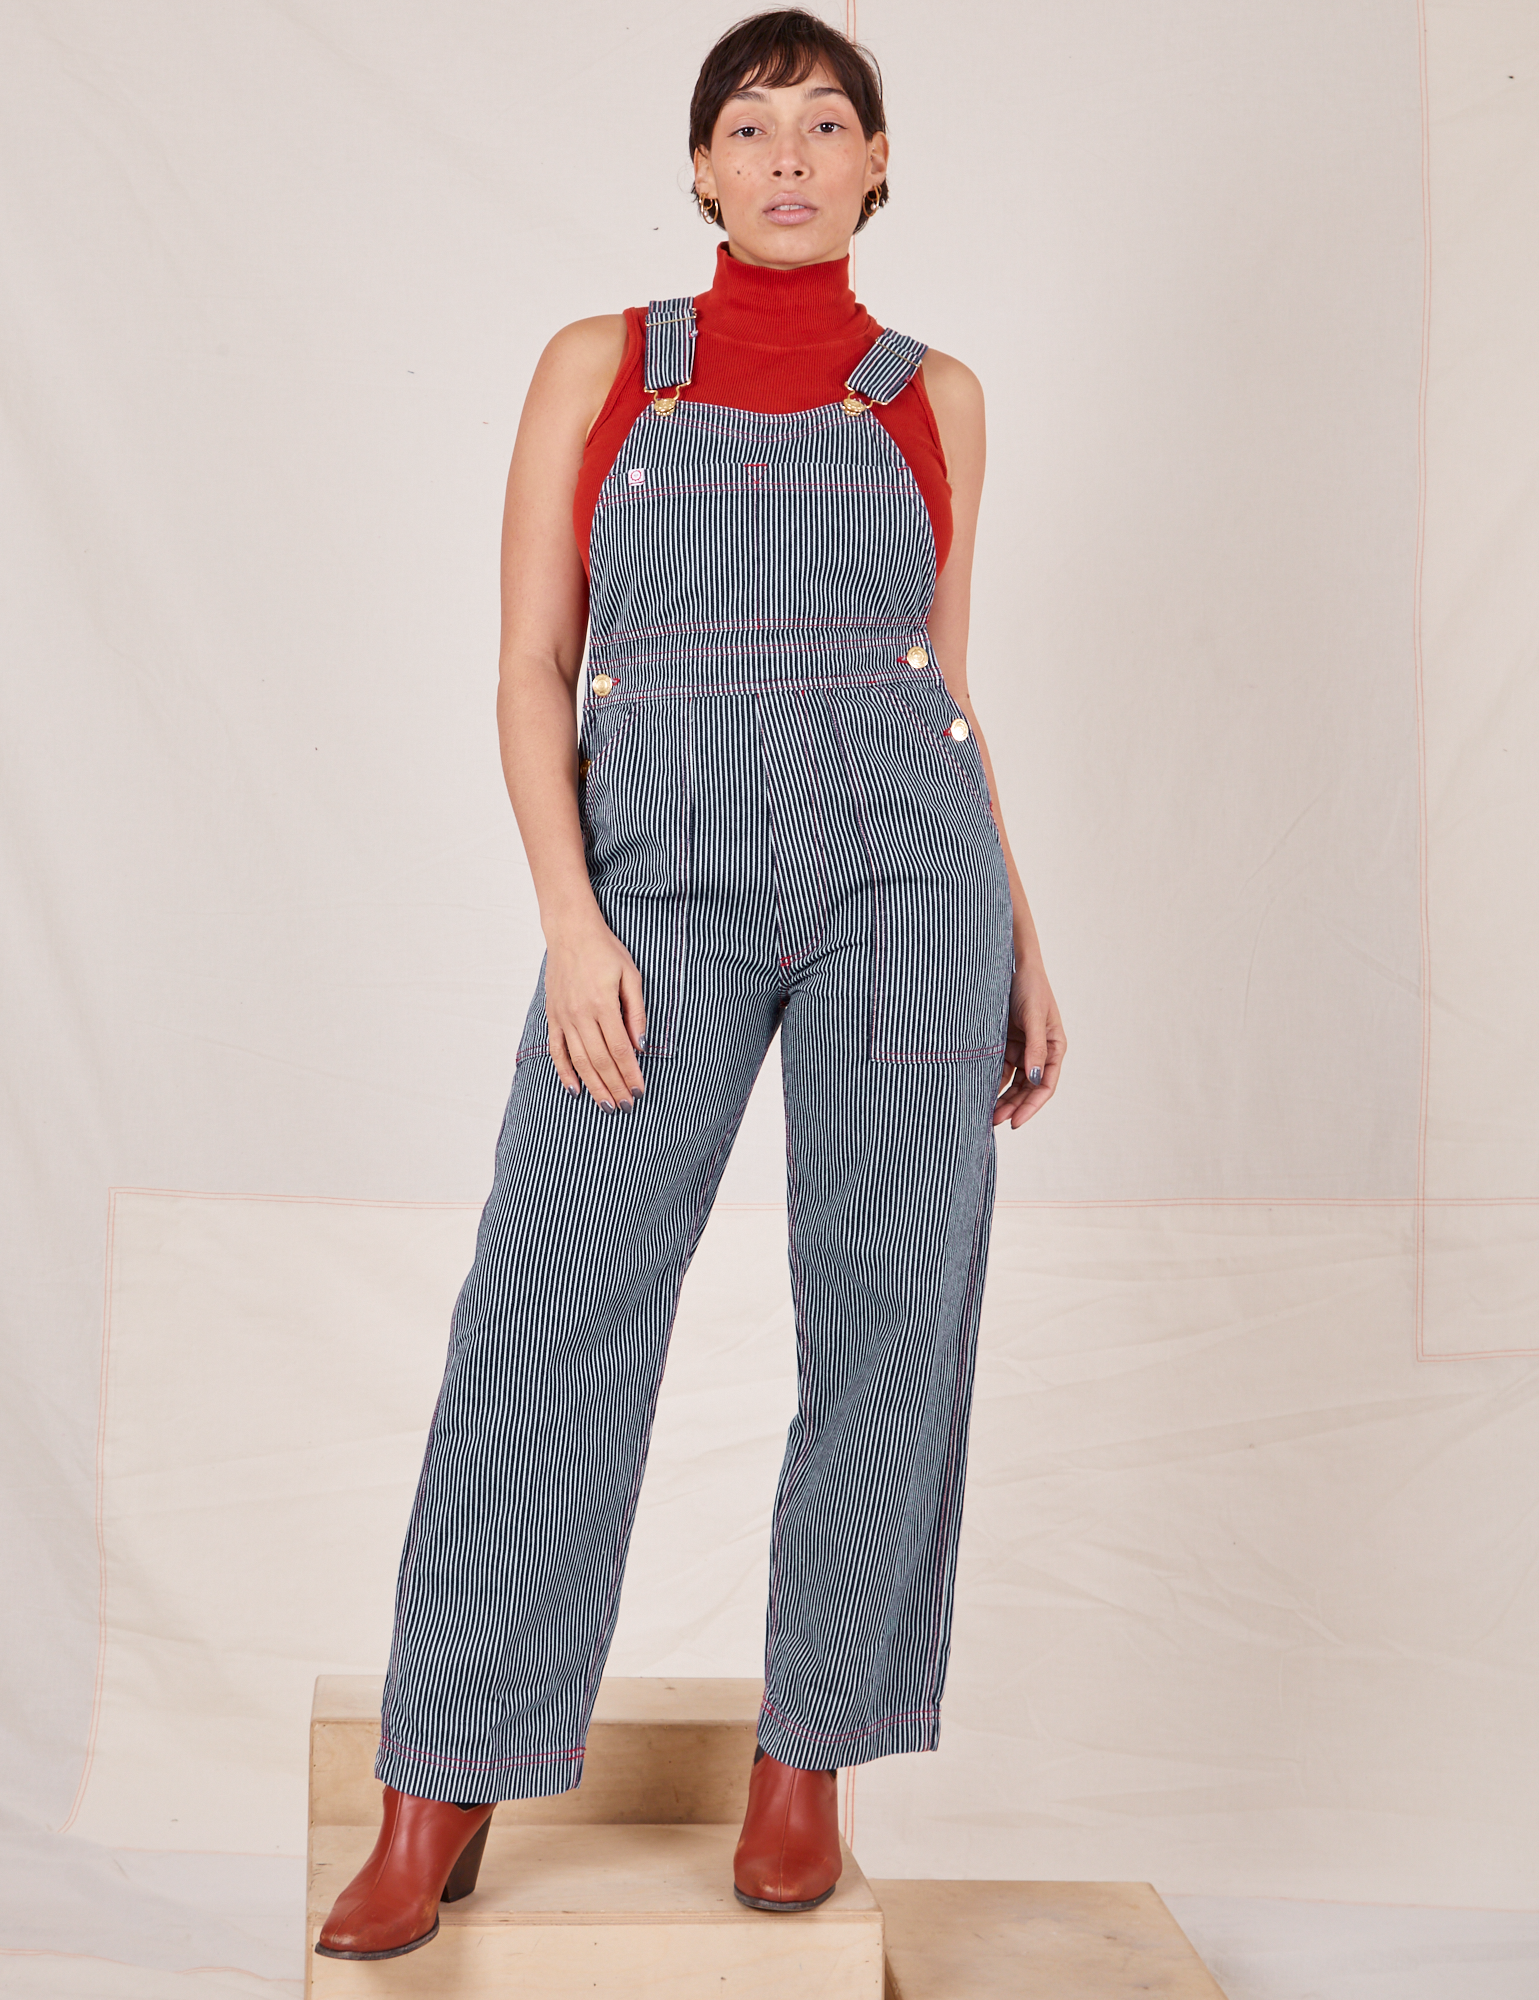 Tiara is 5&#39;4&quot; and wearing XS Railroad Stripe Denim Original Overalls paired with paprika Sleeveless Turtleneck